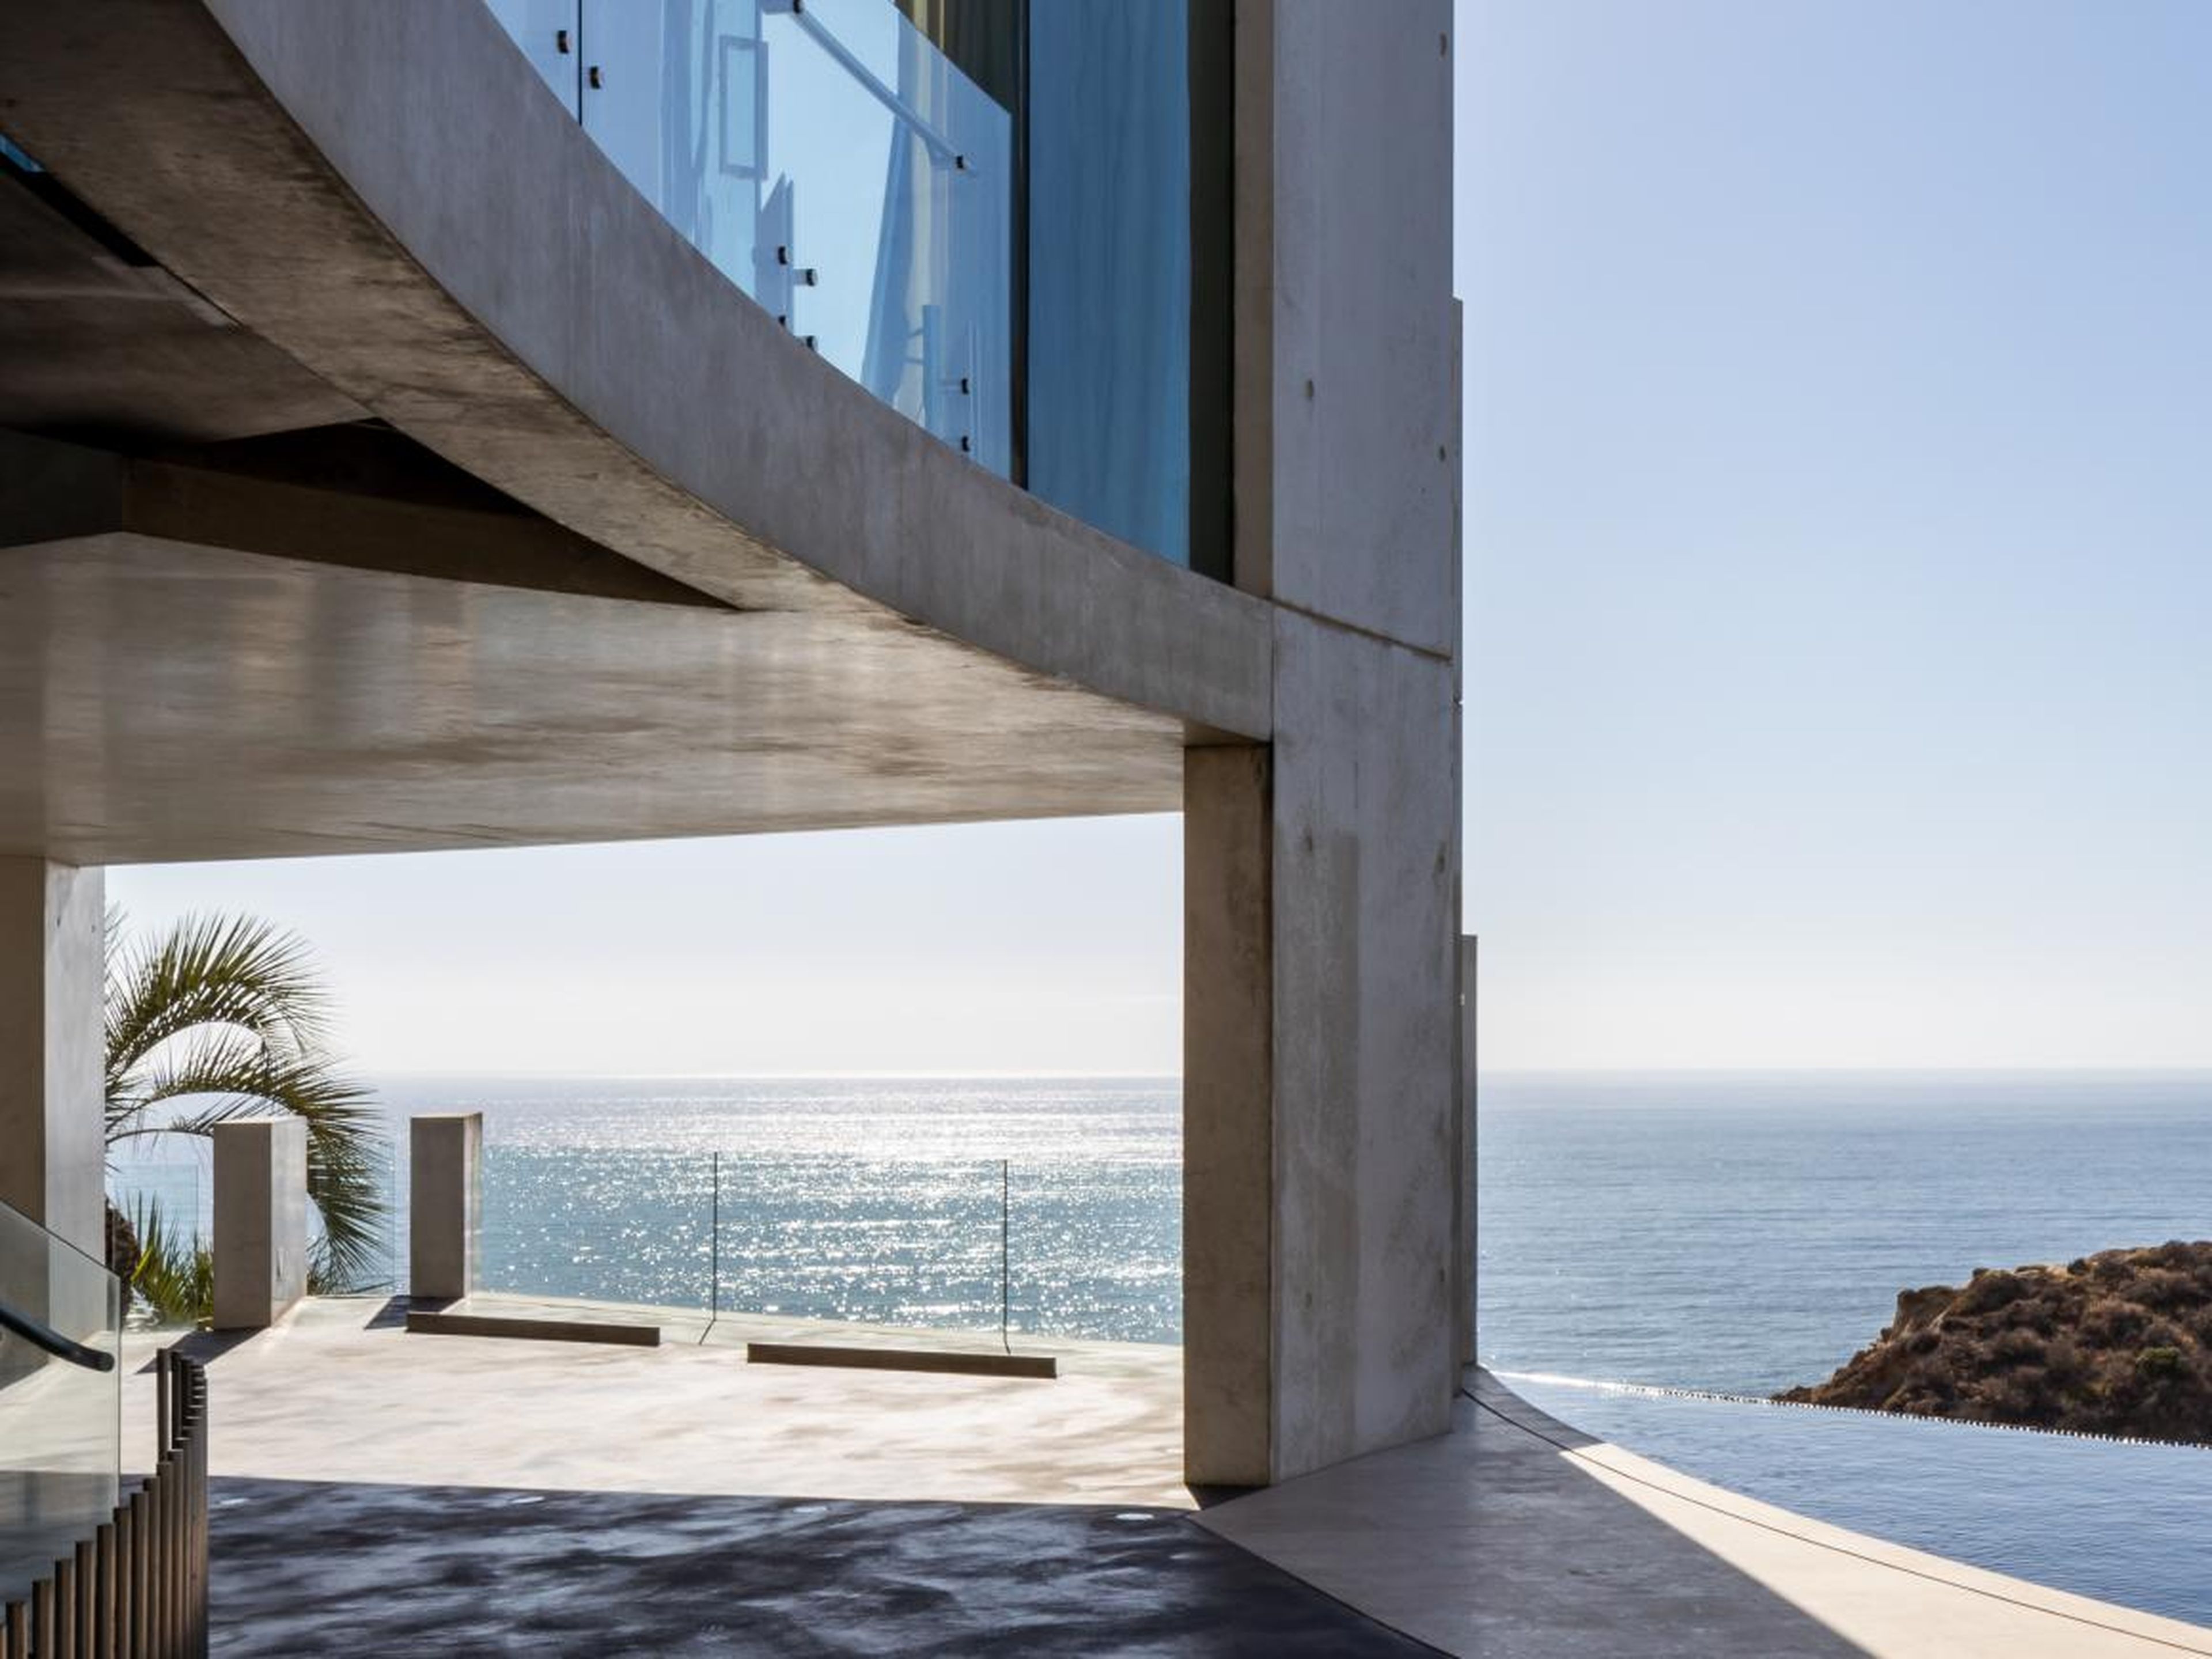 Perched on a cliff overlooking the Pacific Ocean, the home is made of white concrete, stainless steel supports, and floor-to-ceiling glass walls.